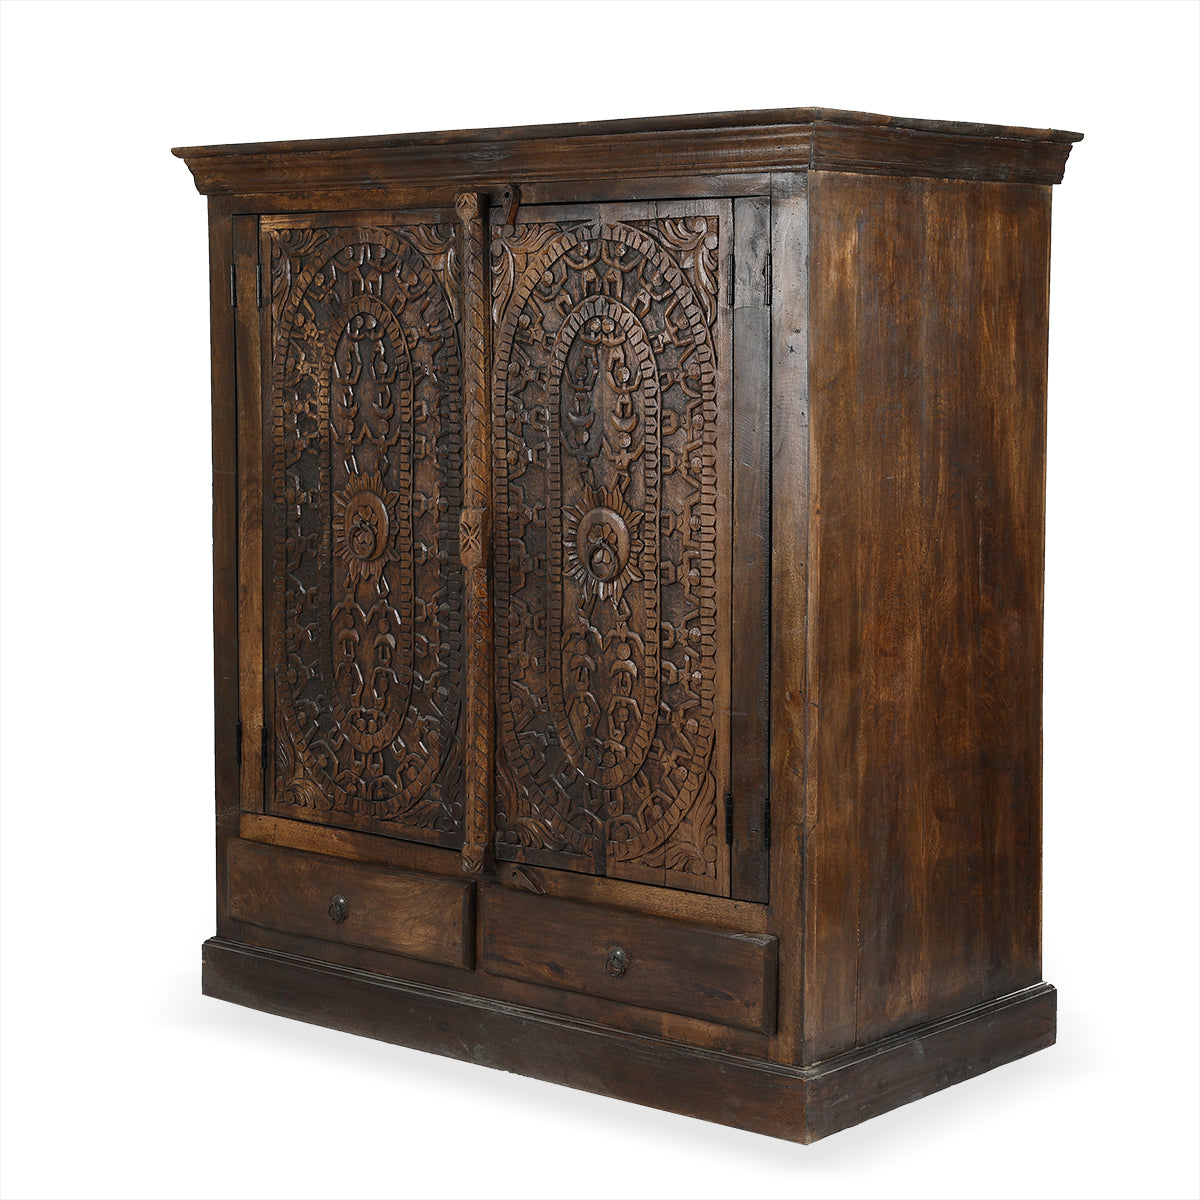 Antique Hardwood Wooden Cabinet Handmade with Carvings in Traditional Tribal Patterns